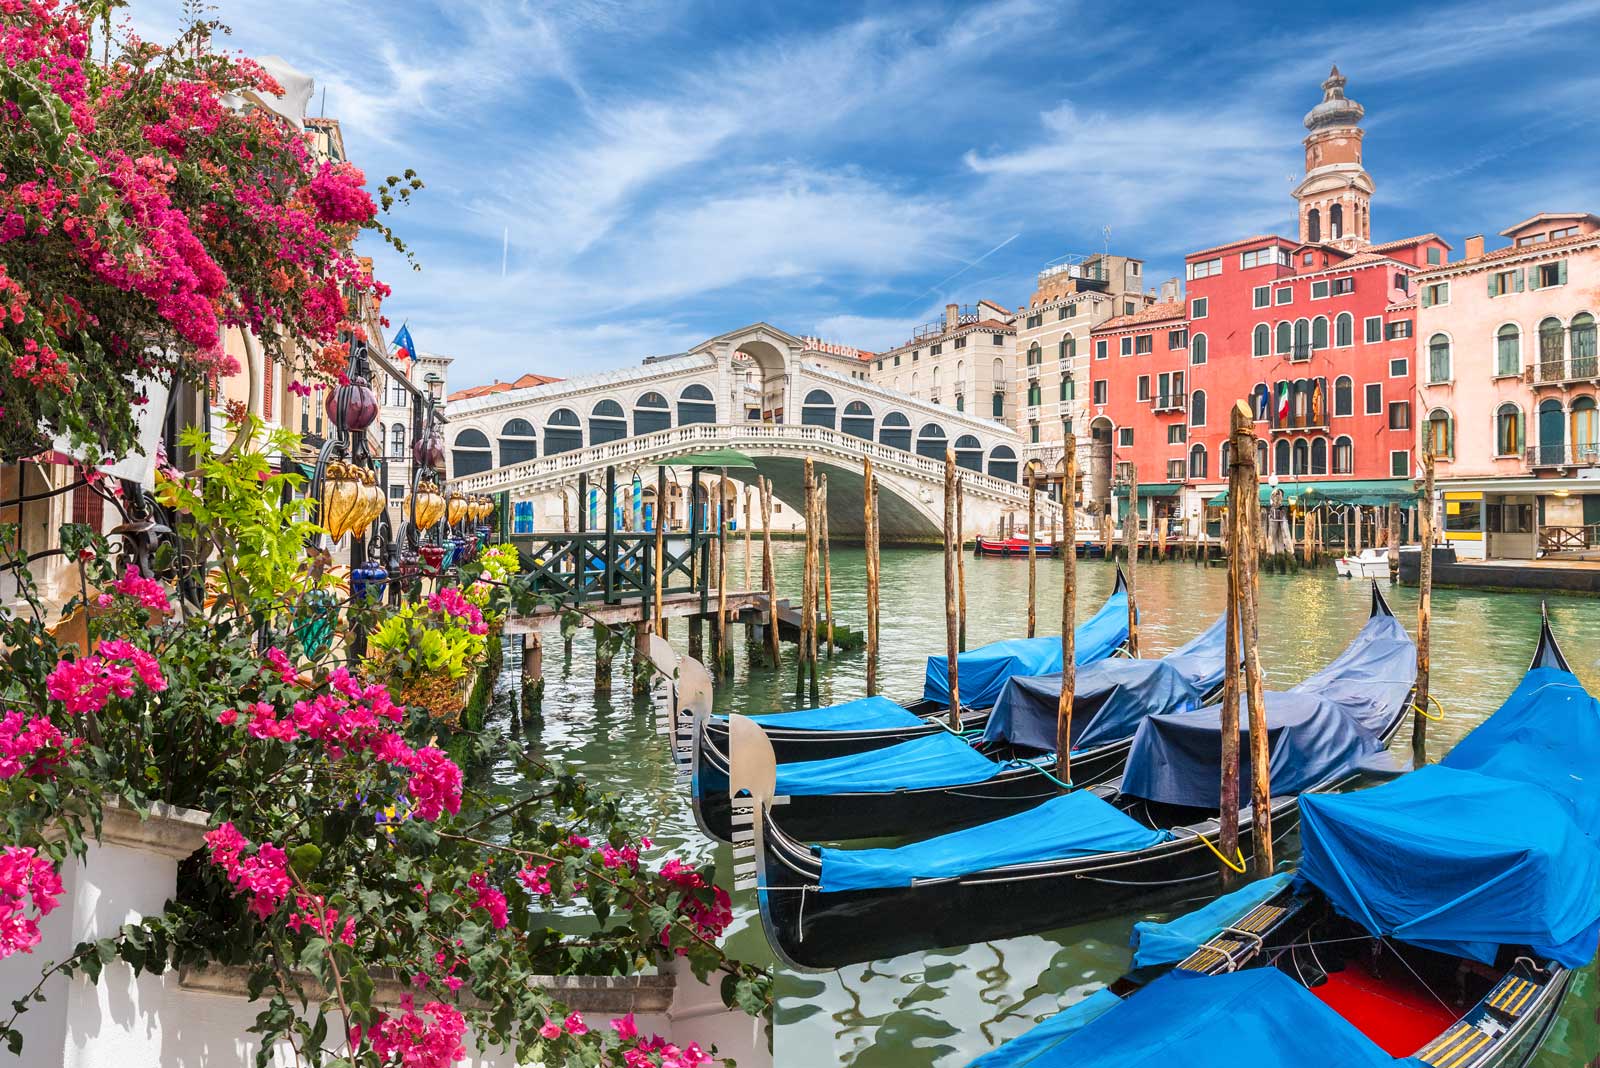 The best tourist places in Venice/Italy [2022]